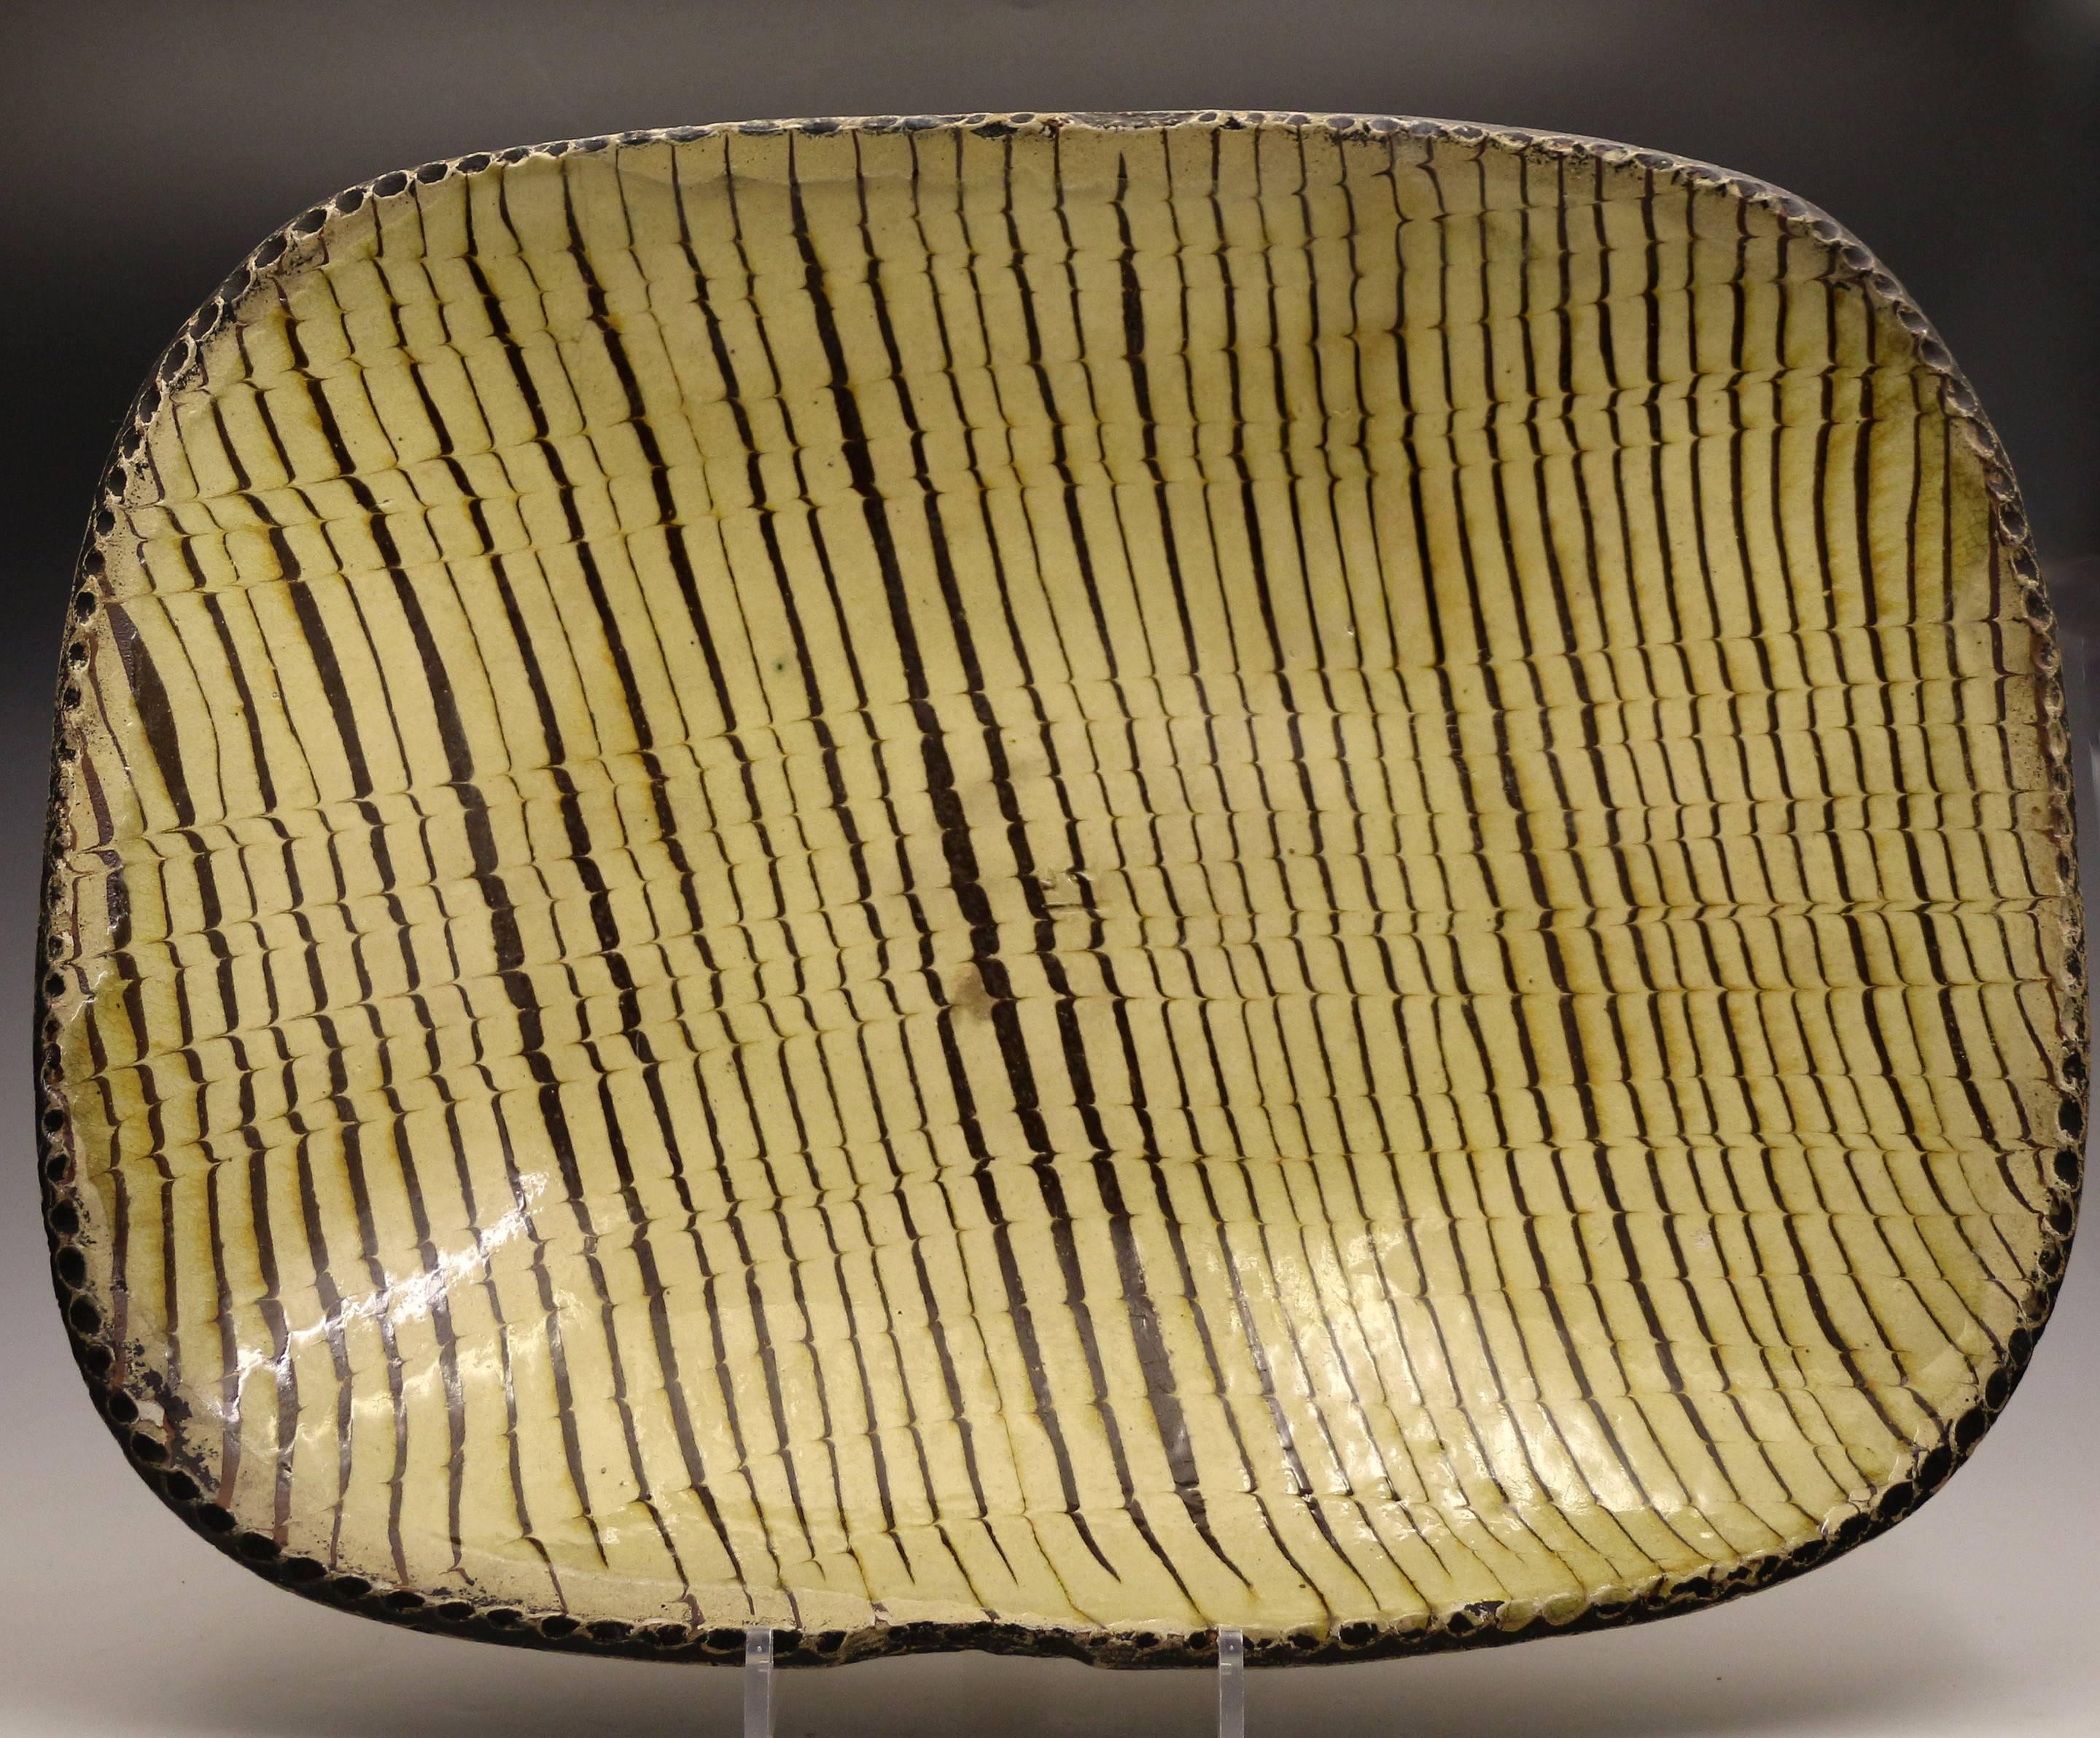 A fine and rare English earthenware comb decorated slipware baking/loaf dish.